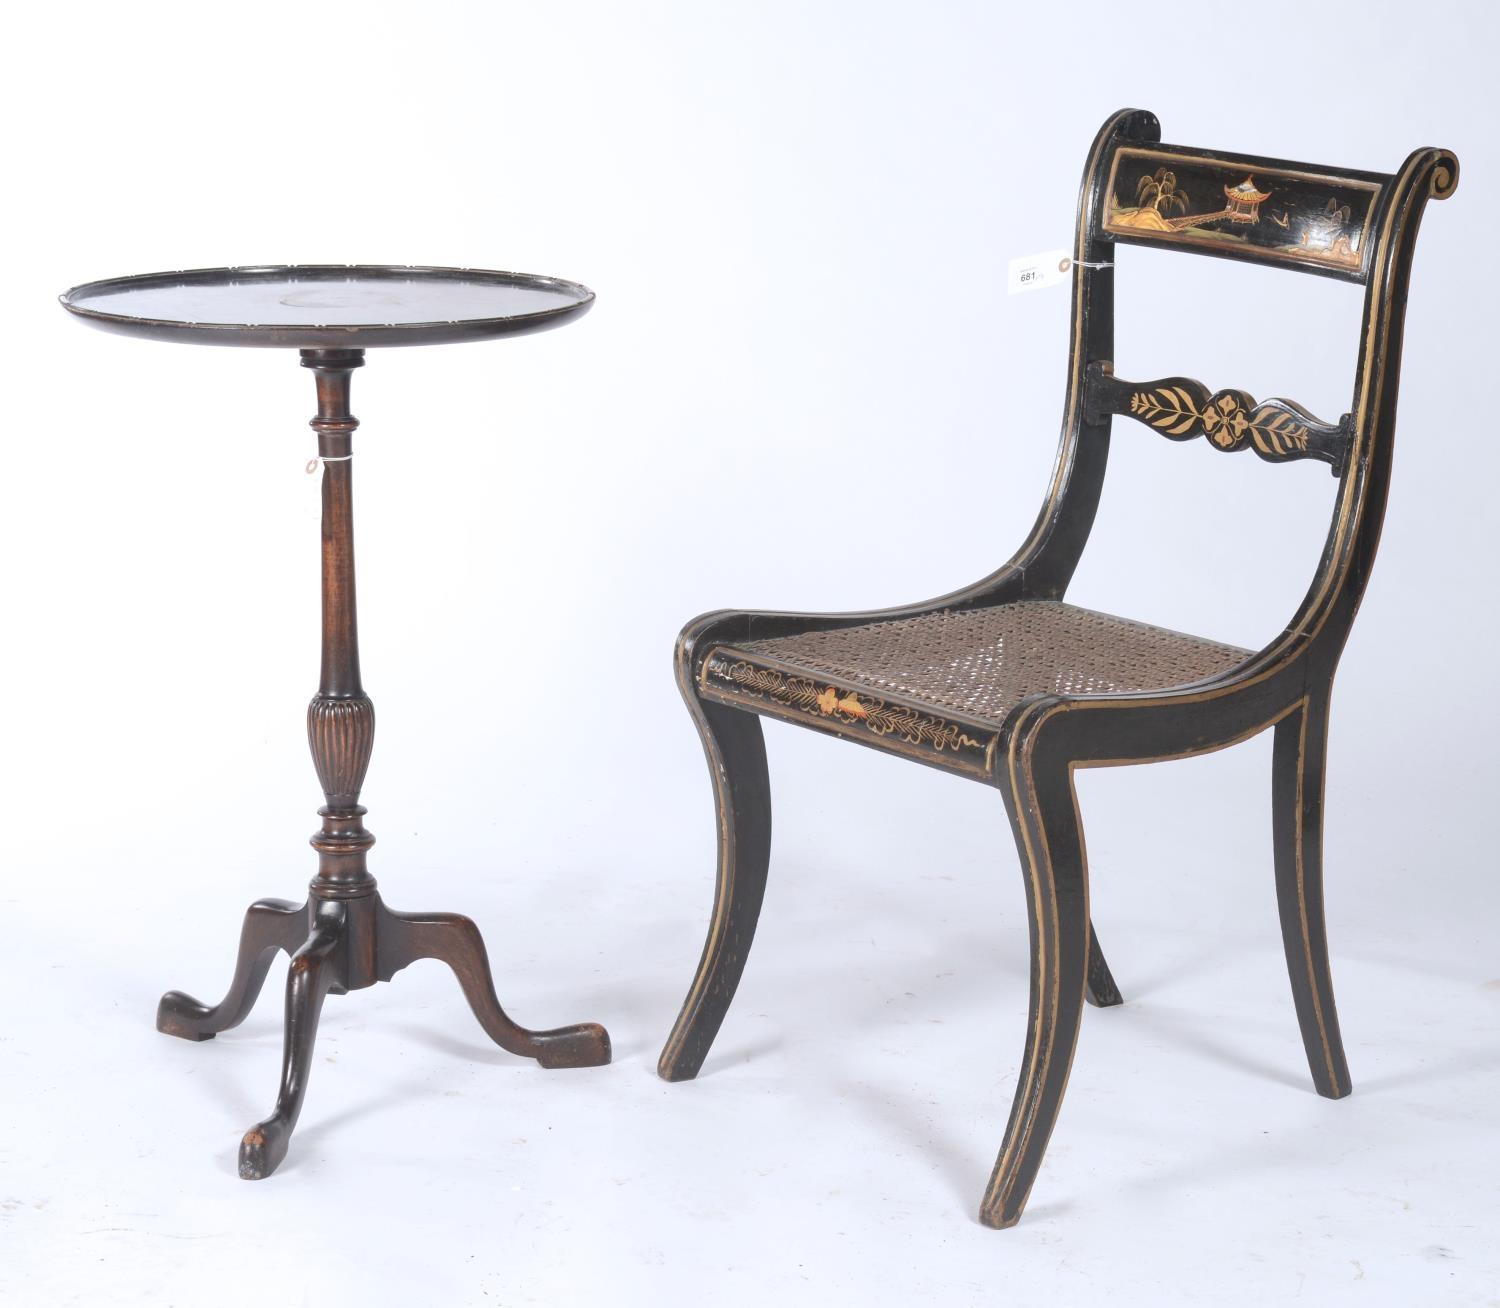 A REGENCY JAPANNED DINING CHAIR, C1820, ON SABRE LEGS WITH CANED SEAT, SEAT HEIGHT 40CM, AND A